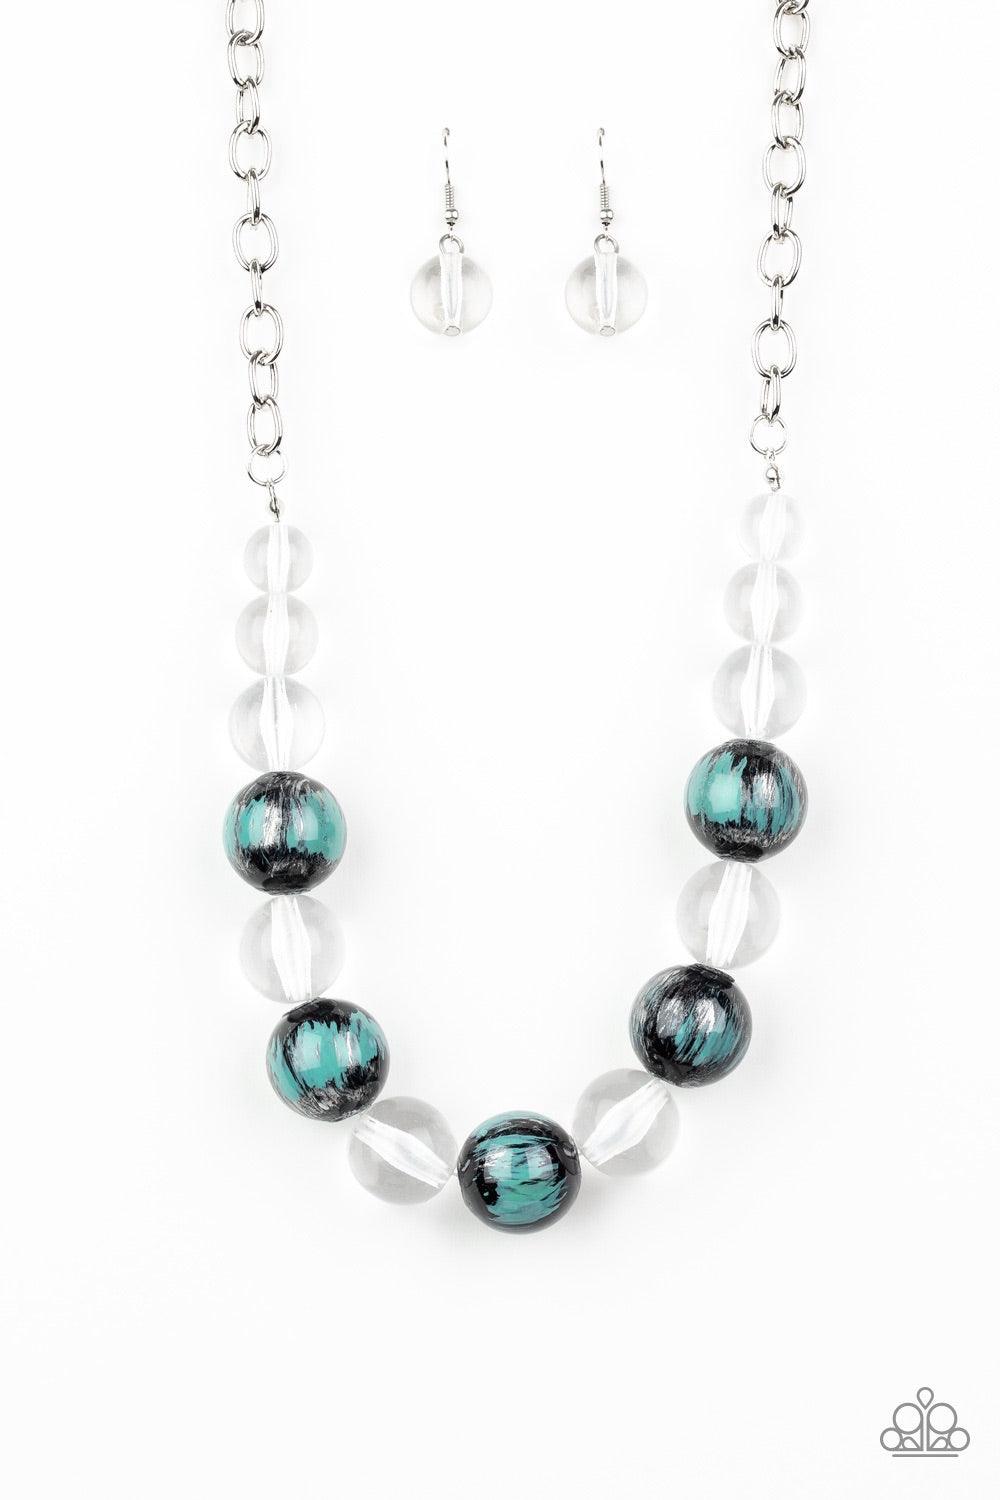 Paparazzi Accessories Torrid Tide - Blue A collection of shiny black and glassy clear beads are threaded along an invisible wire below the collar. The black beads are splashed in hints of refreshing blue and shiny metallic paint for a colorful finish. Fea